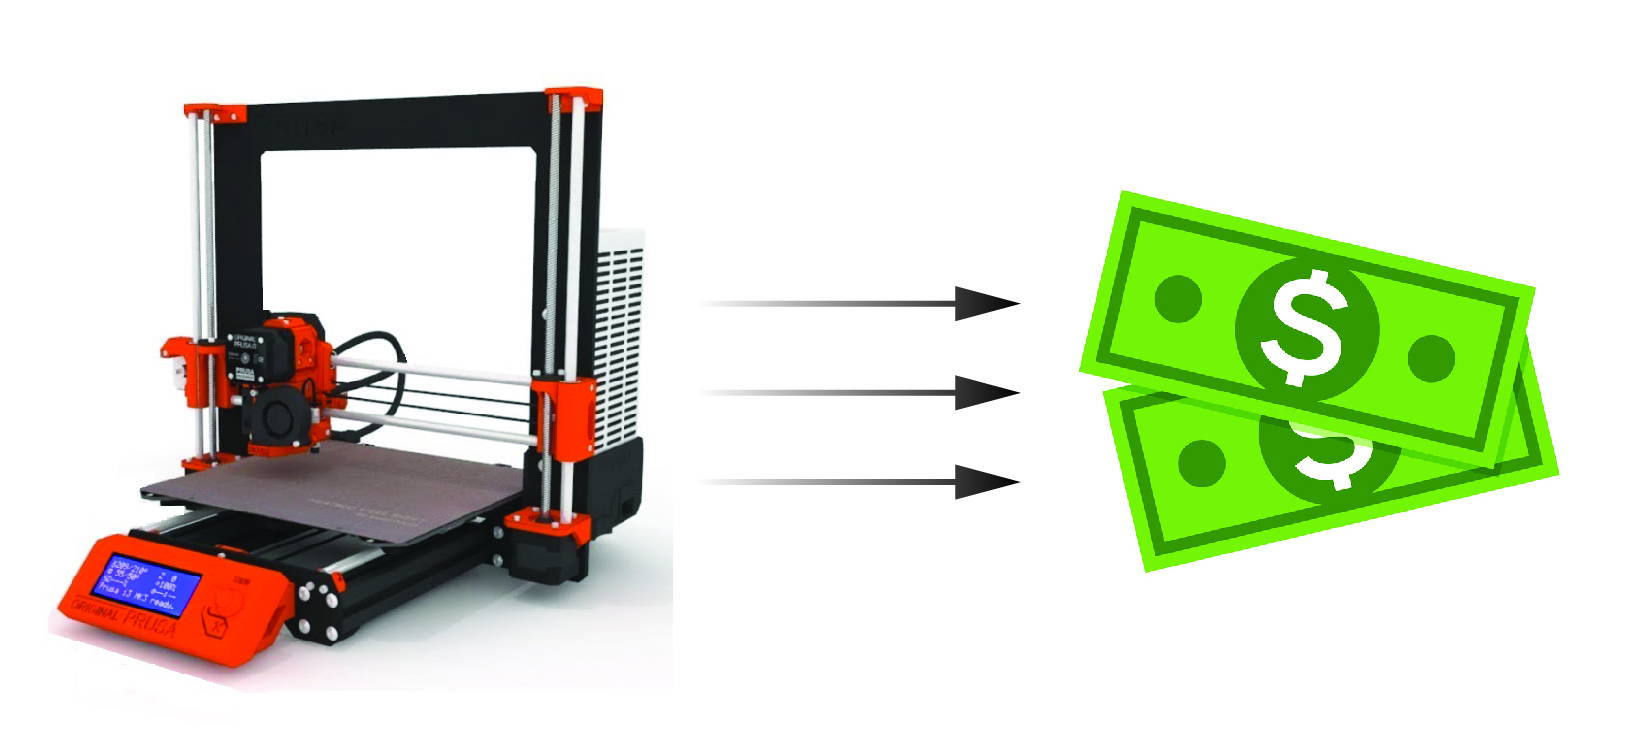 How to Make Money with 3D Printing